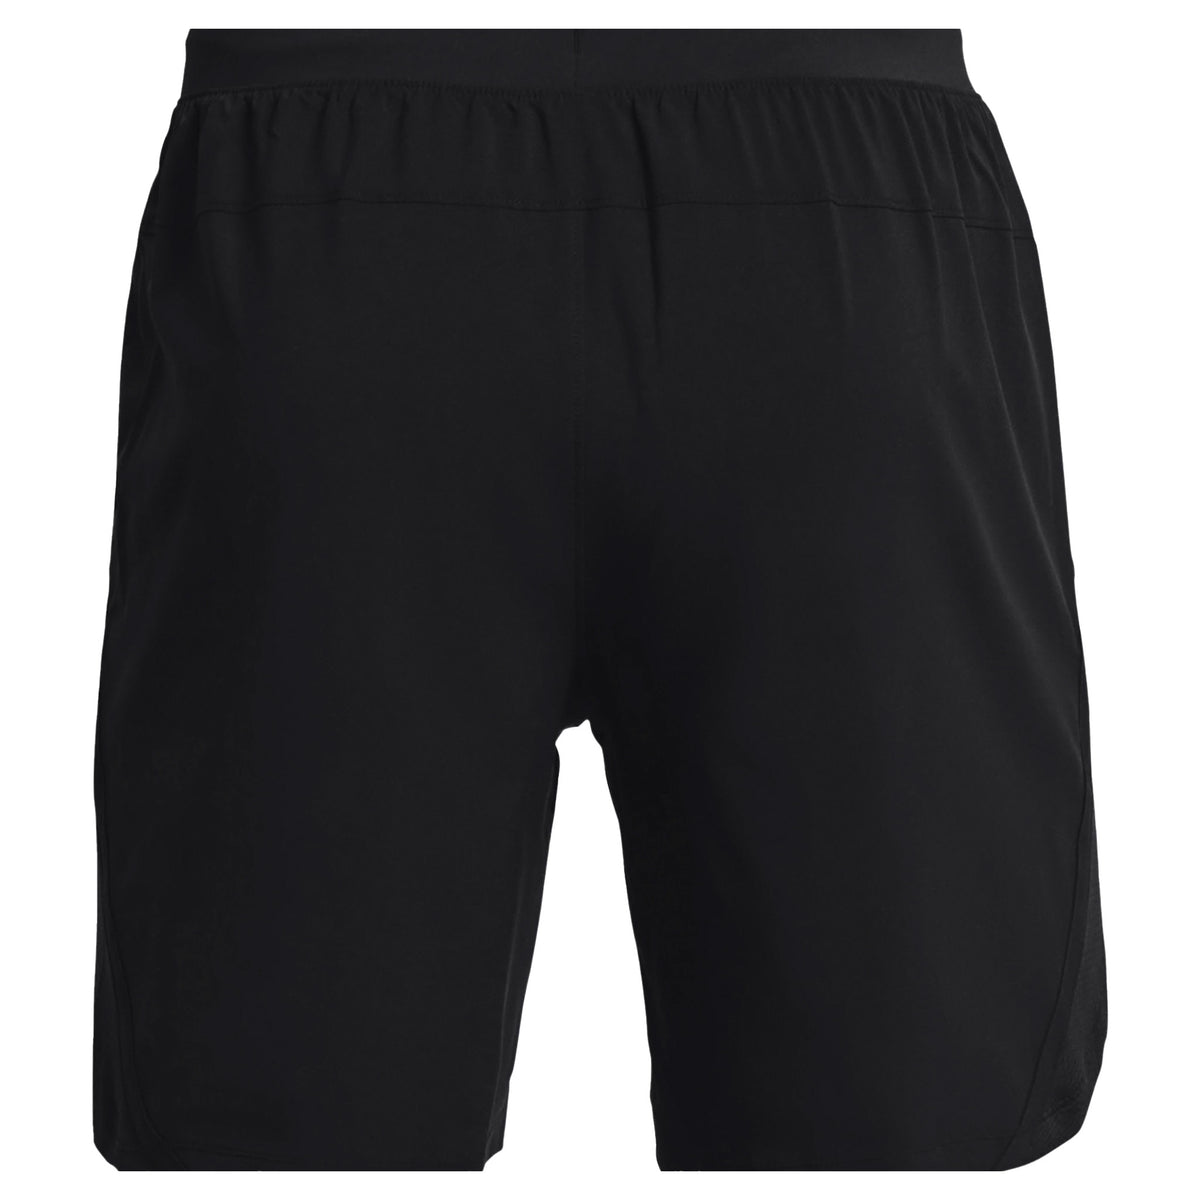 Under Armour Mens Launch 7inch Running Shorts: Black